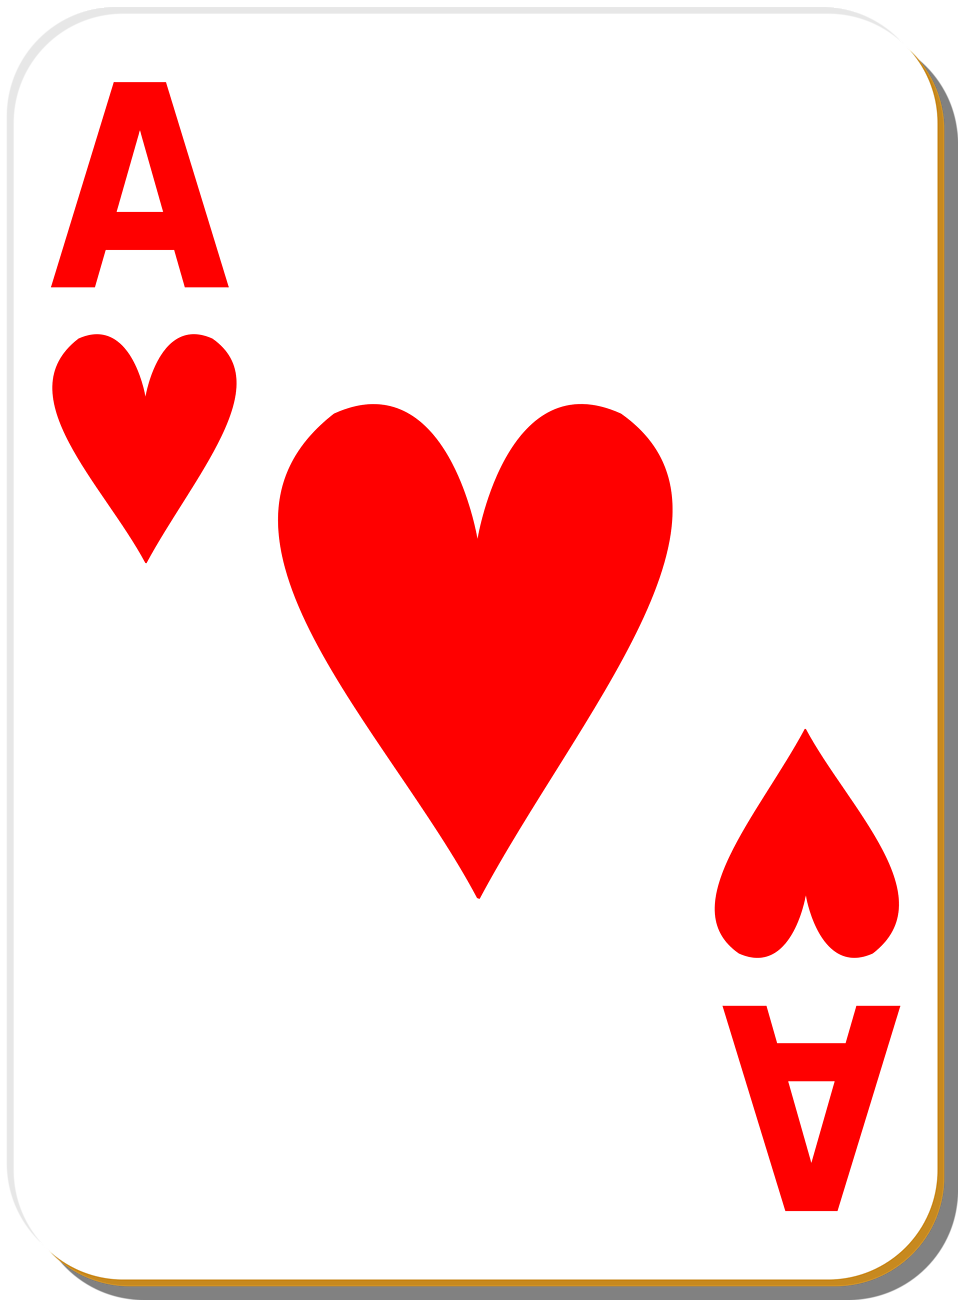 Aces clipart - Clipground